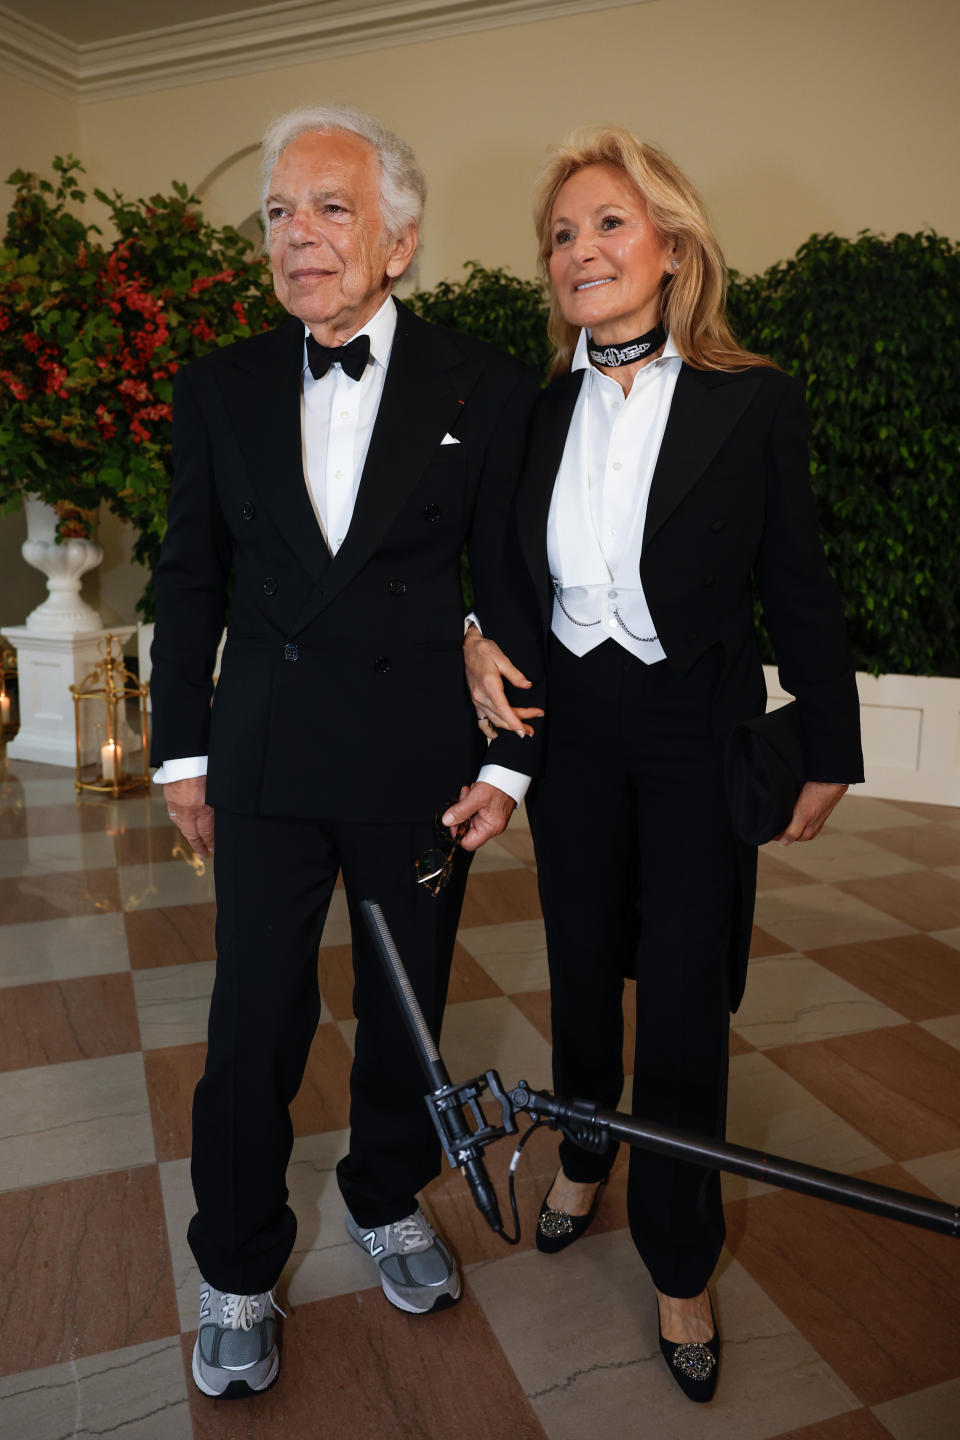 WASHINGTON, DC - JUNE 22: Ralph Lauren and his wife Ricky Lauren arrive at the White House on June 22, 2023 in Washington, DC. President Joe Biden and first lady Jill Biden are hosting a state dinner for Indian Prime Minister Narendra Modi as part of his official state visit.  (Photo by Tasos Katopodis/Getty Images)